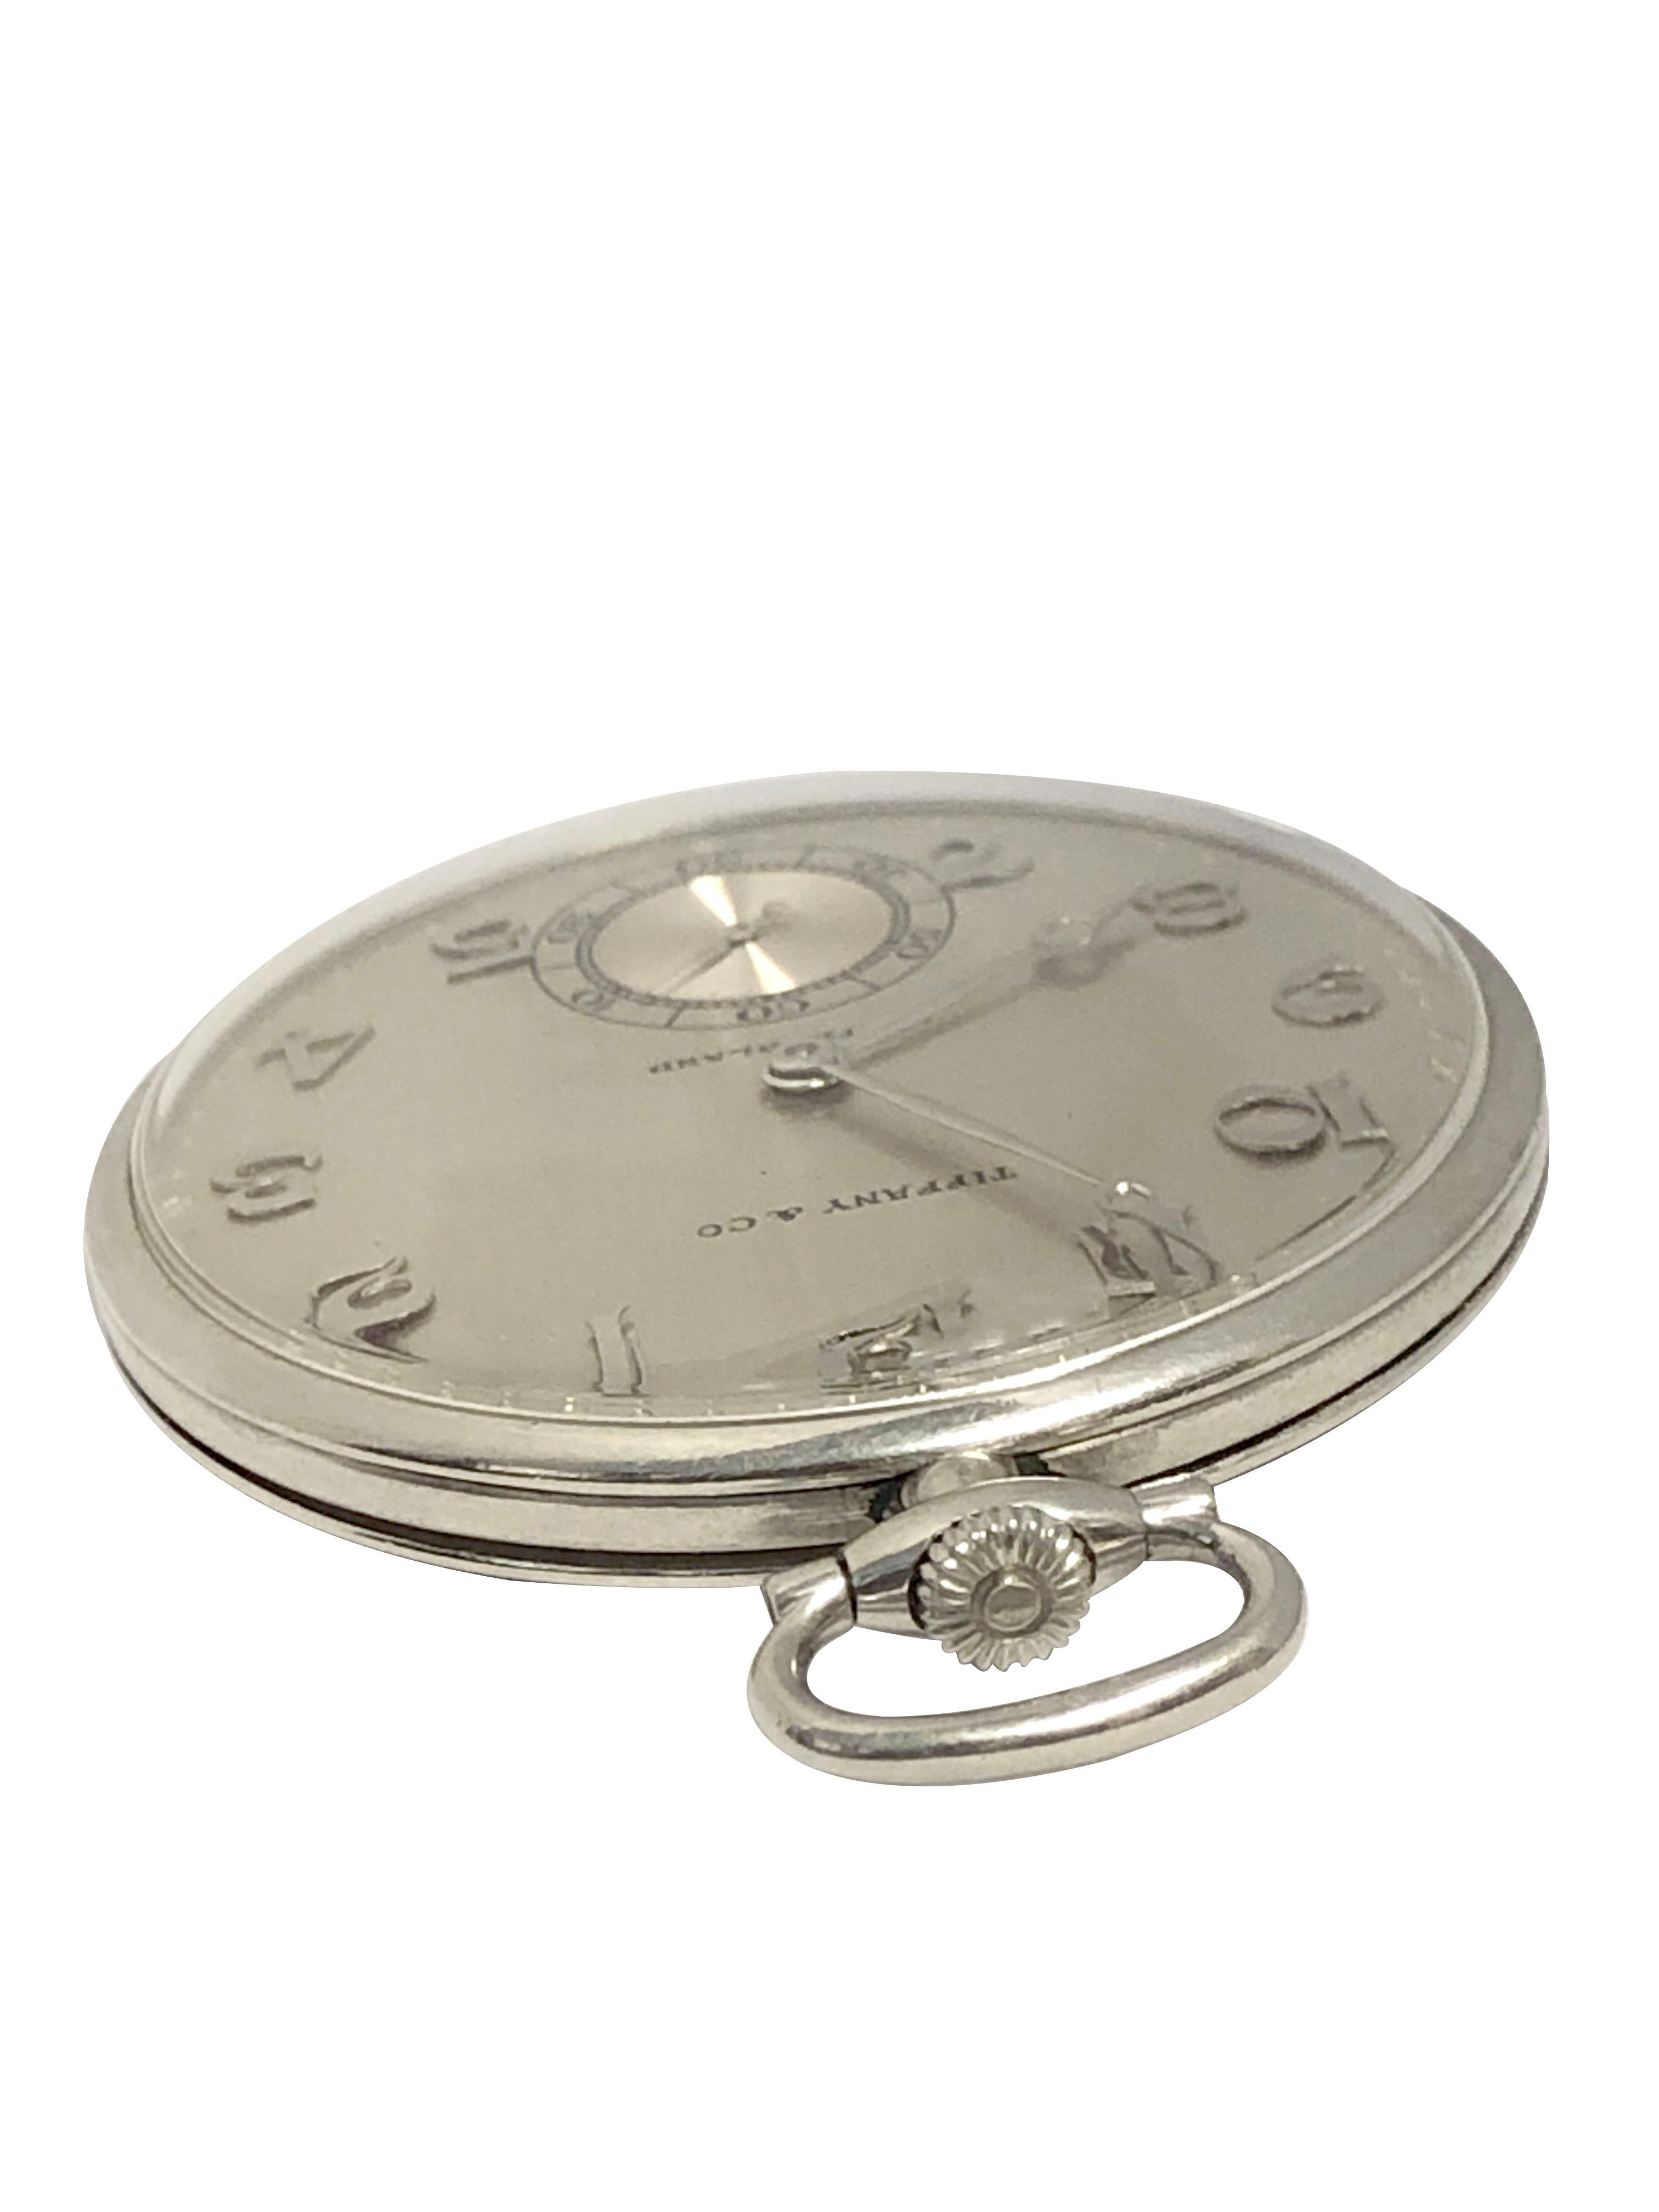 Circa 1930 Patek Philippe Pocket Watch  Retailed by Tiffany & company,  43 M.M. Platinum 3 Piece case, 18 Jewel Manual wind Nickle lever movement. Silver Satin dial with raised Gold Arabic Markers, sub seconds hand, Diamond shape Plaque for